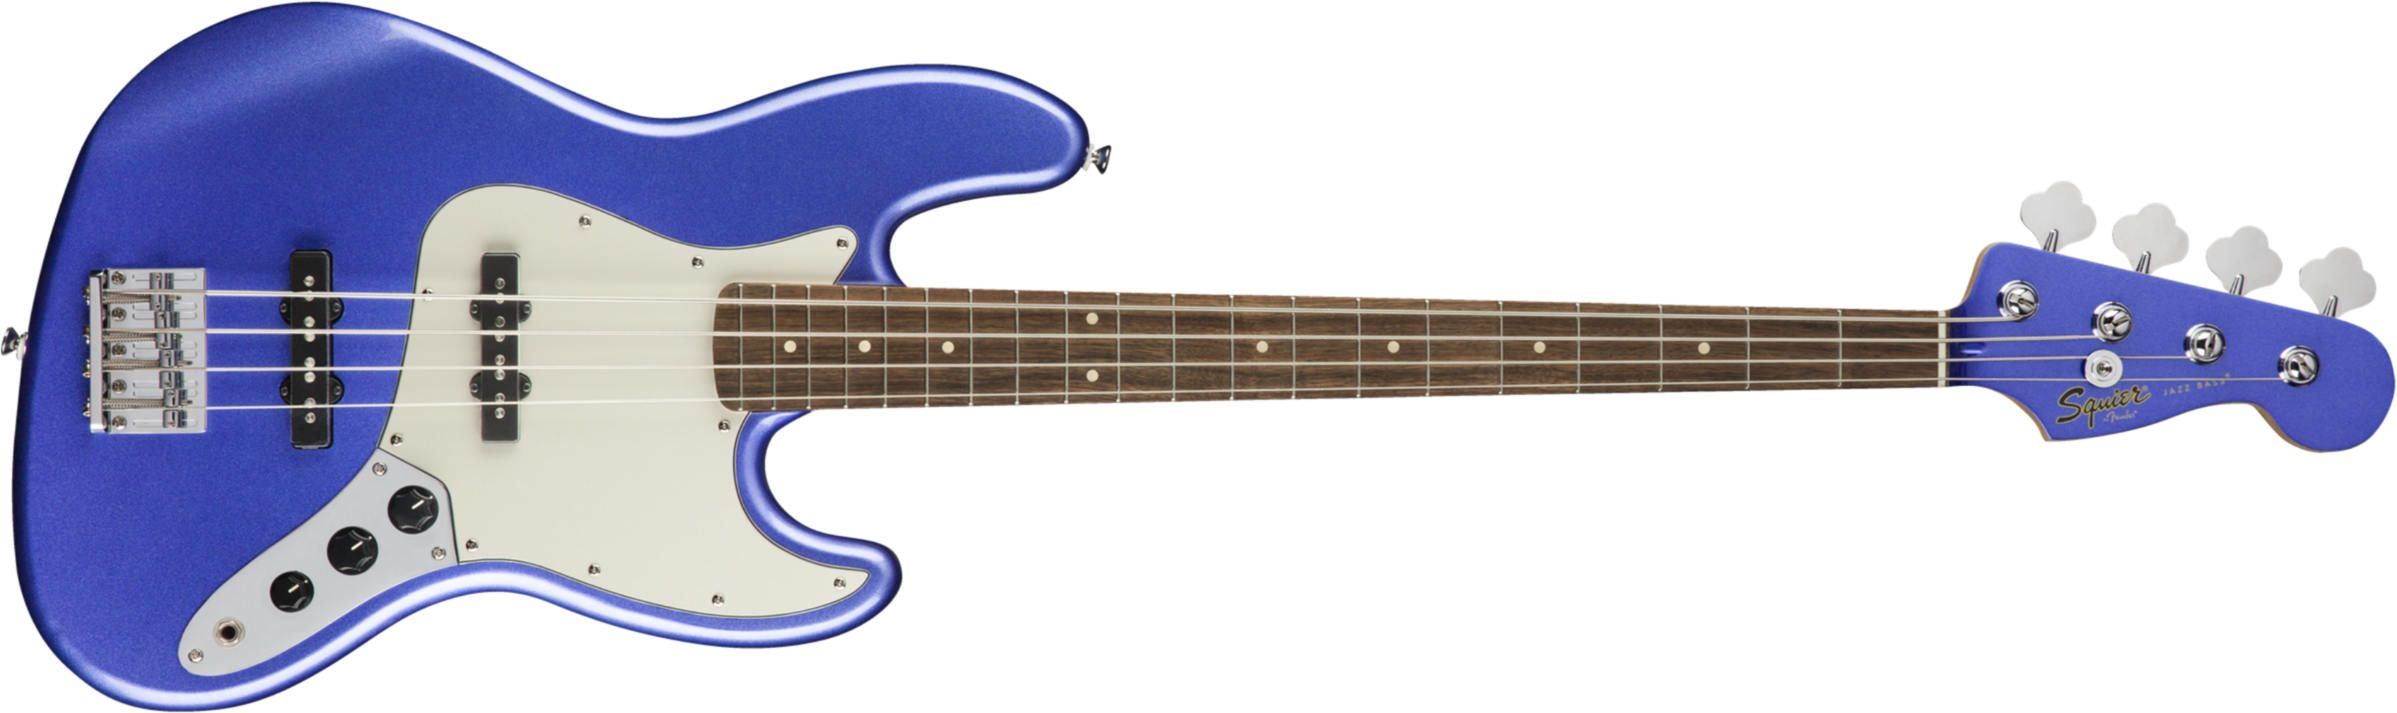 Squier Contemporary Jazz Bass Lau - Ocean Blue Metallic - Solid body electric bass - Main picture